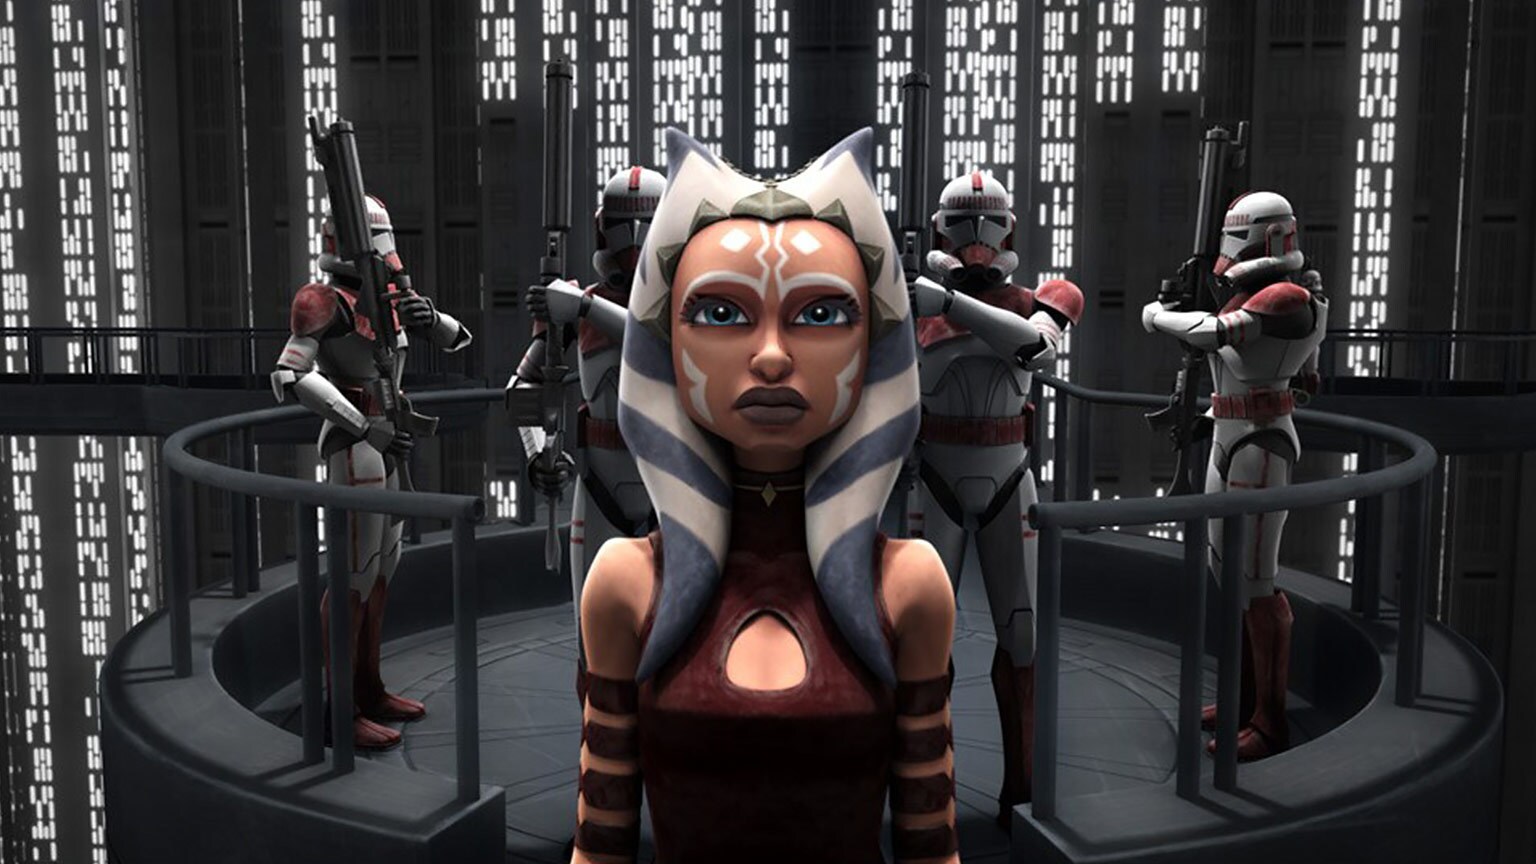 The Clone Wars Rewatch: You've Got "The Wrong Jedi"